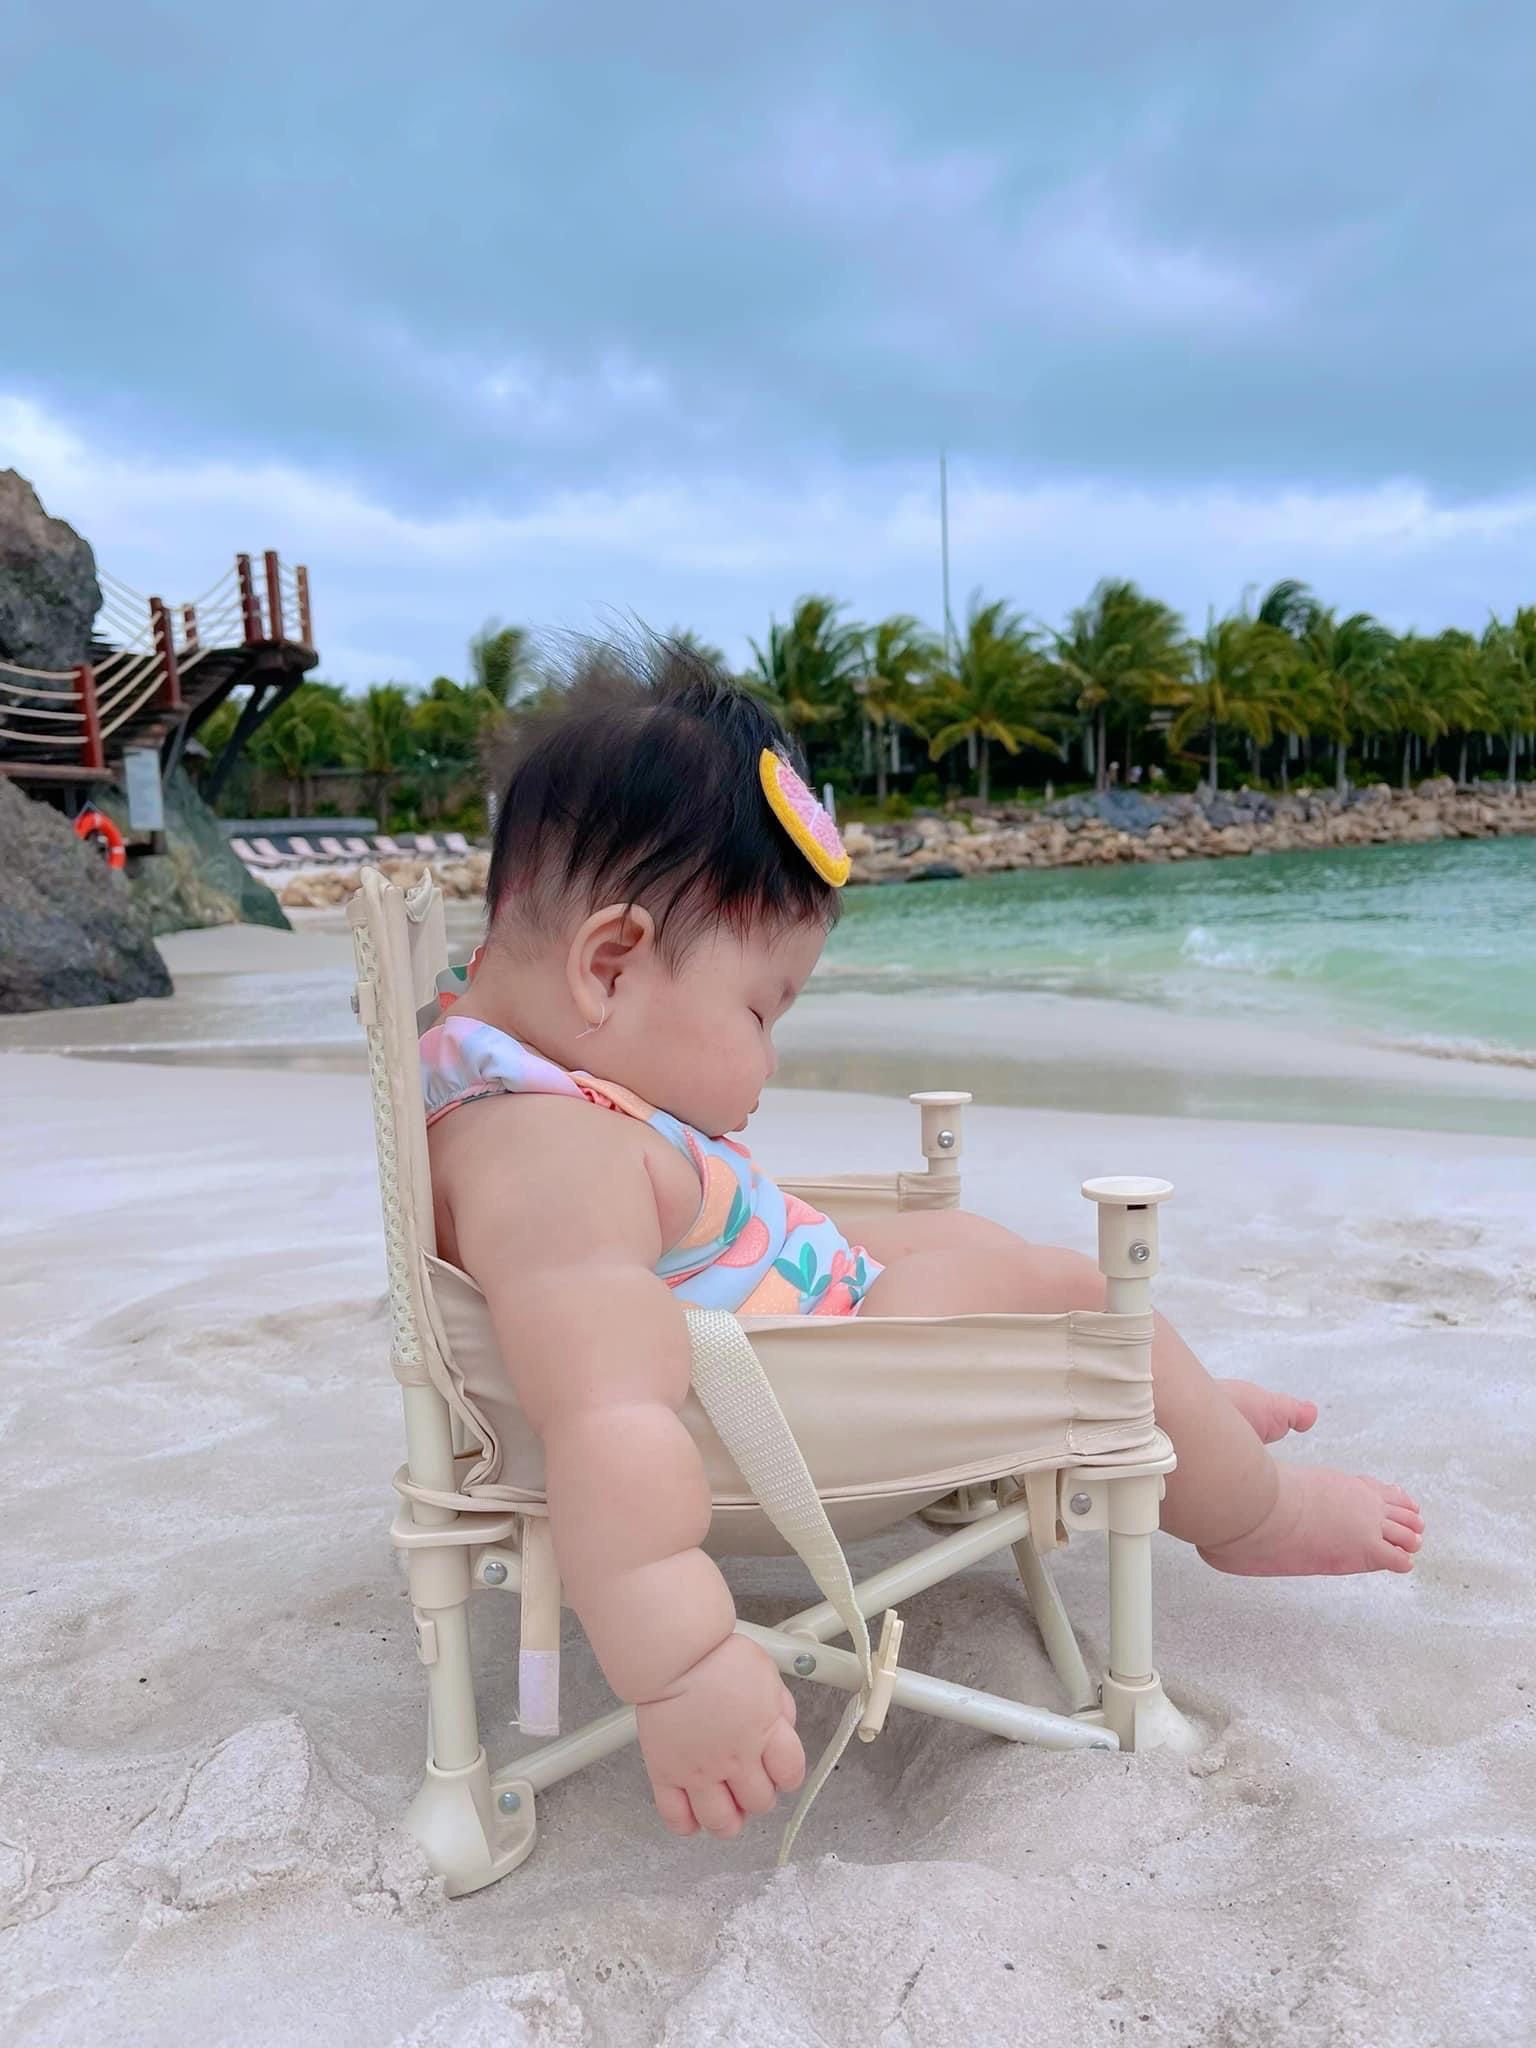 While swimming, sleepiness came suddenly, a 7-month-old baby caused netizens to have a fever when he fell asleep on the beach of Nha Trang - Photo 2.